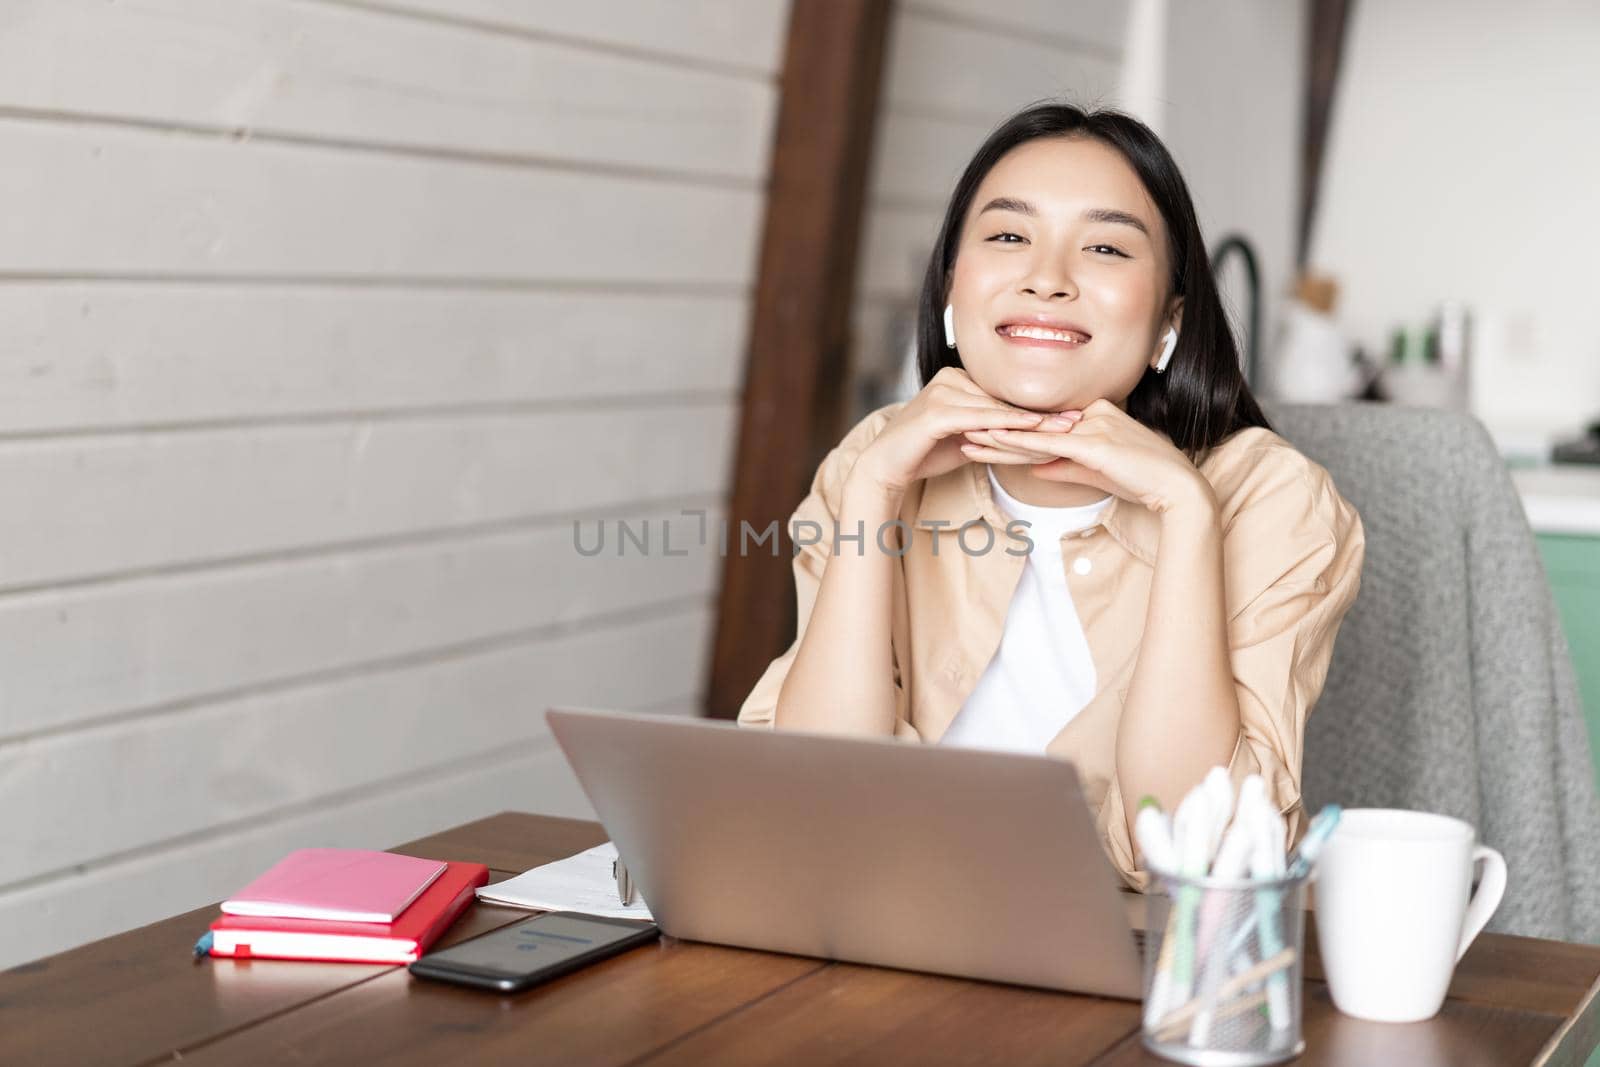 Online education and work from home concept. Smiling asian girl sits with laptop and earphones in kitchen, working remotely, having conference or video chat.